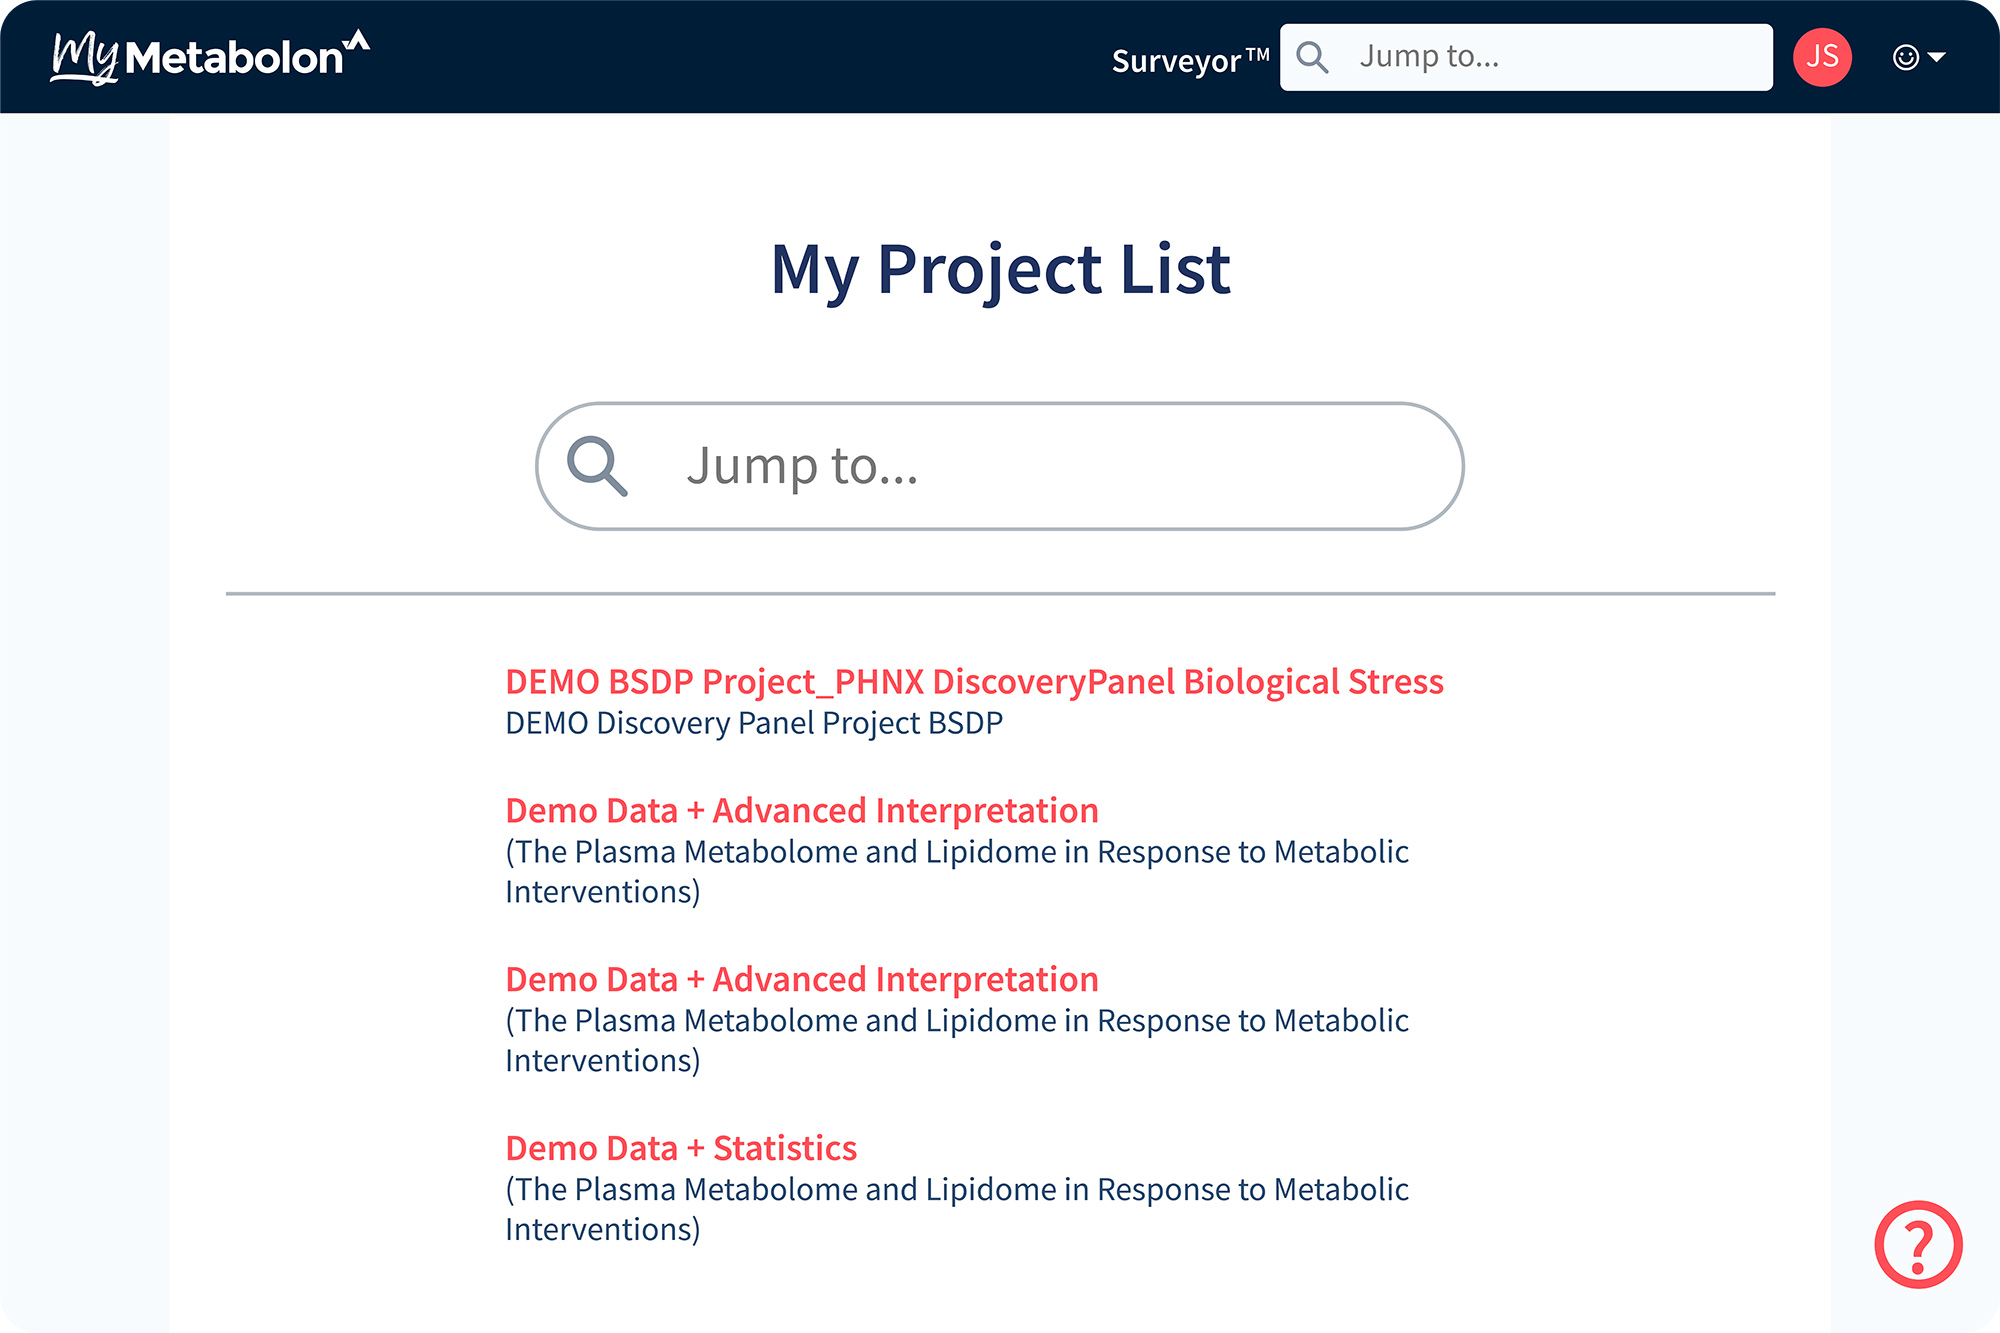 My Project List